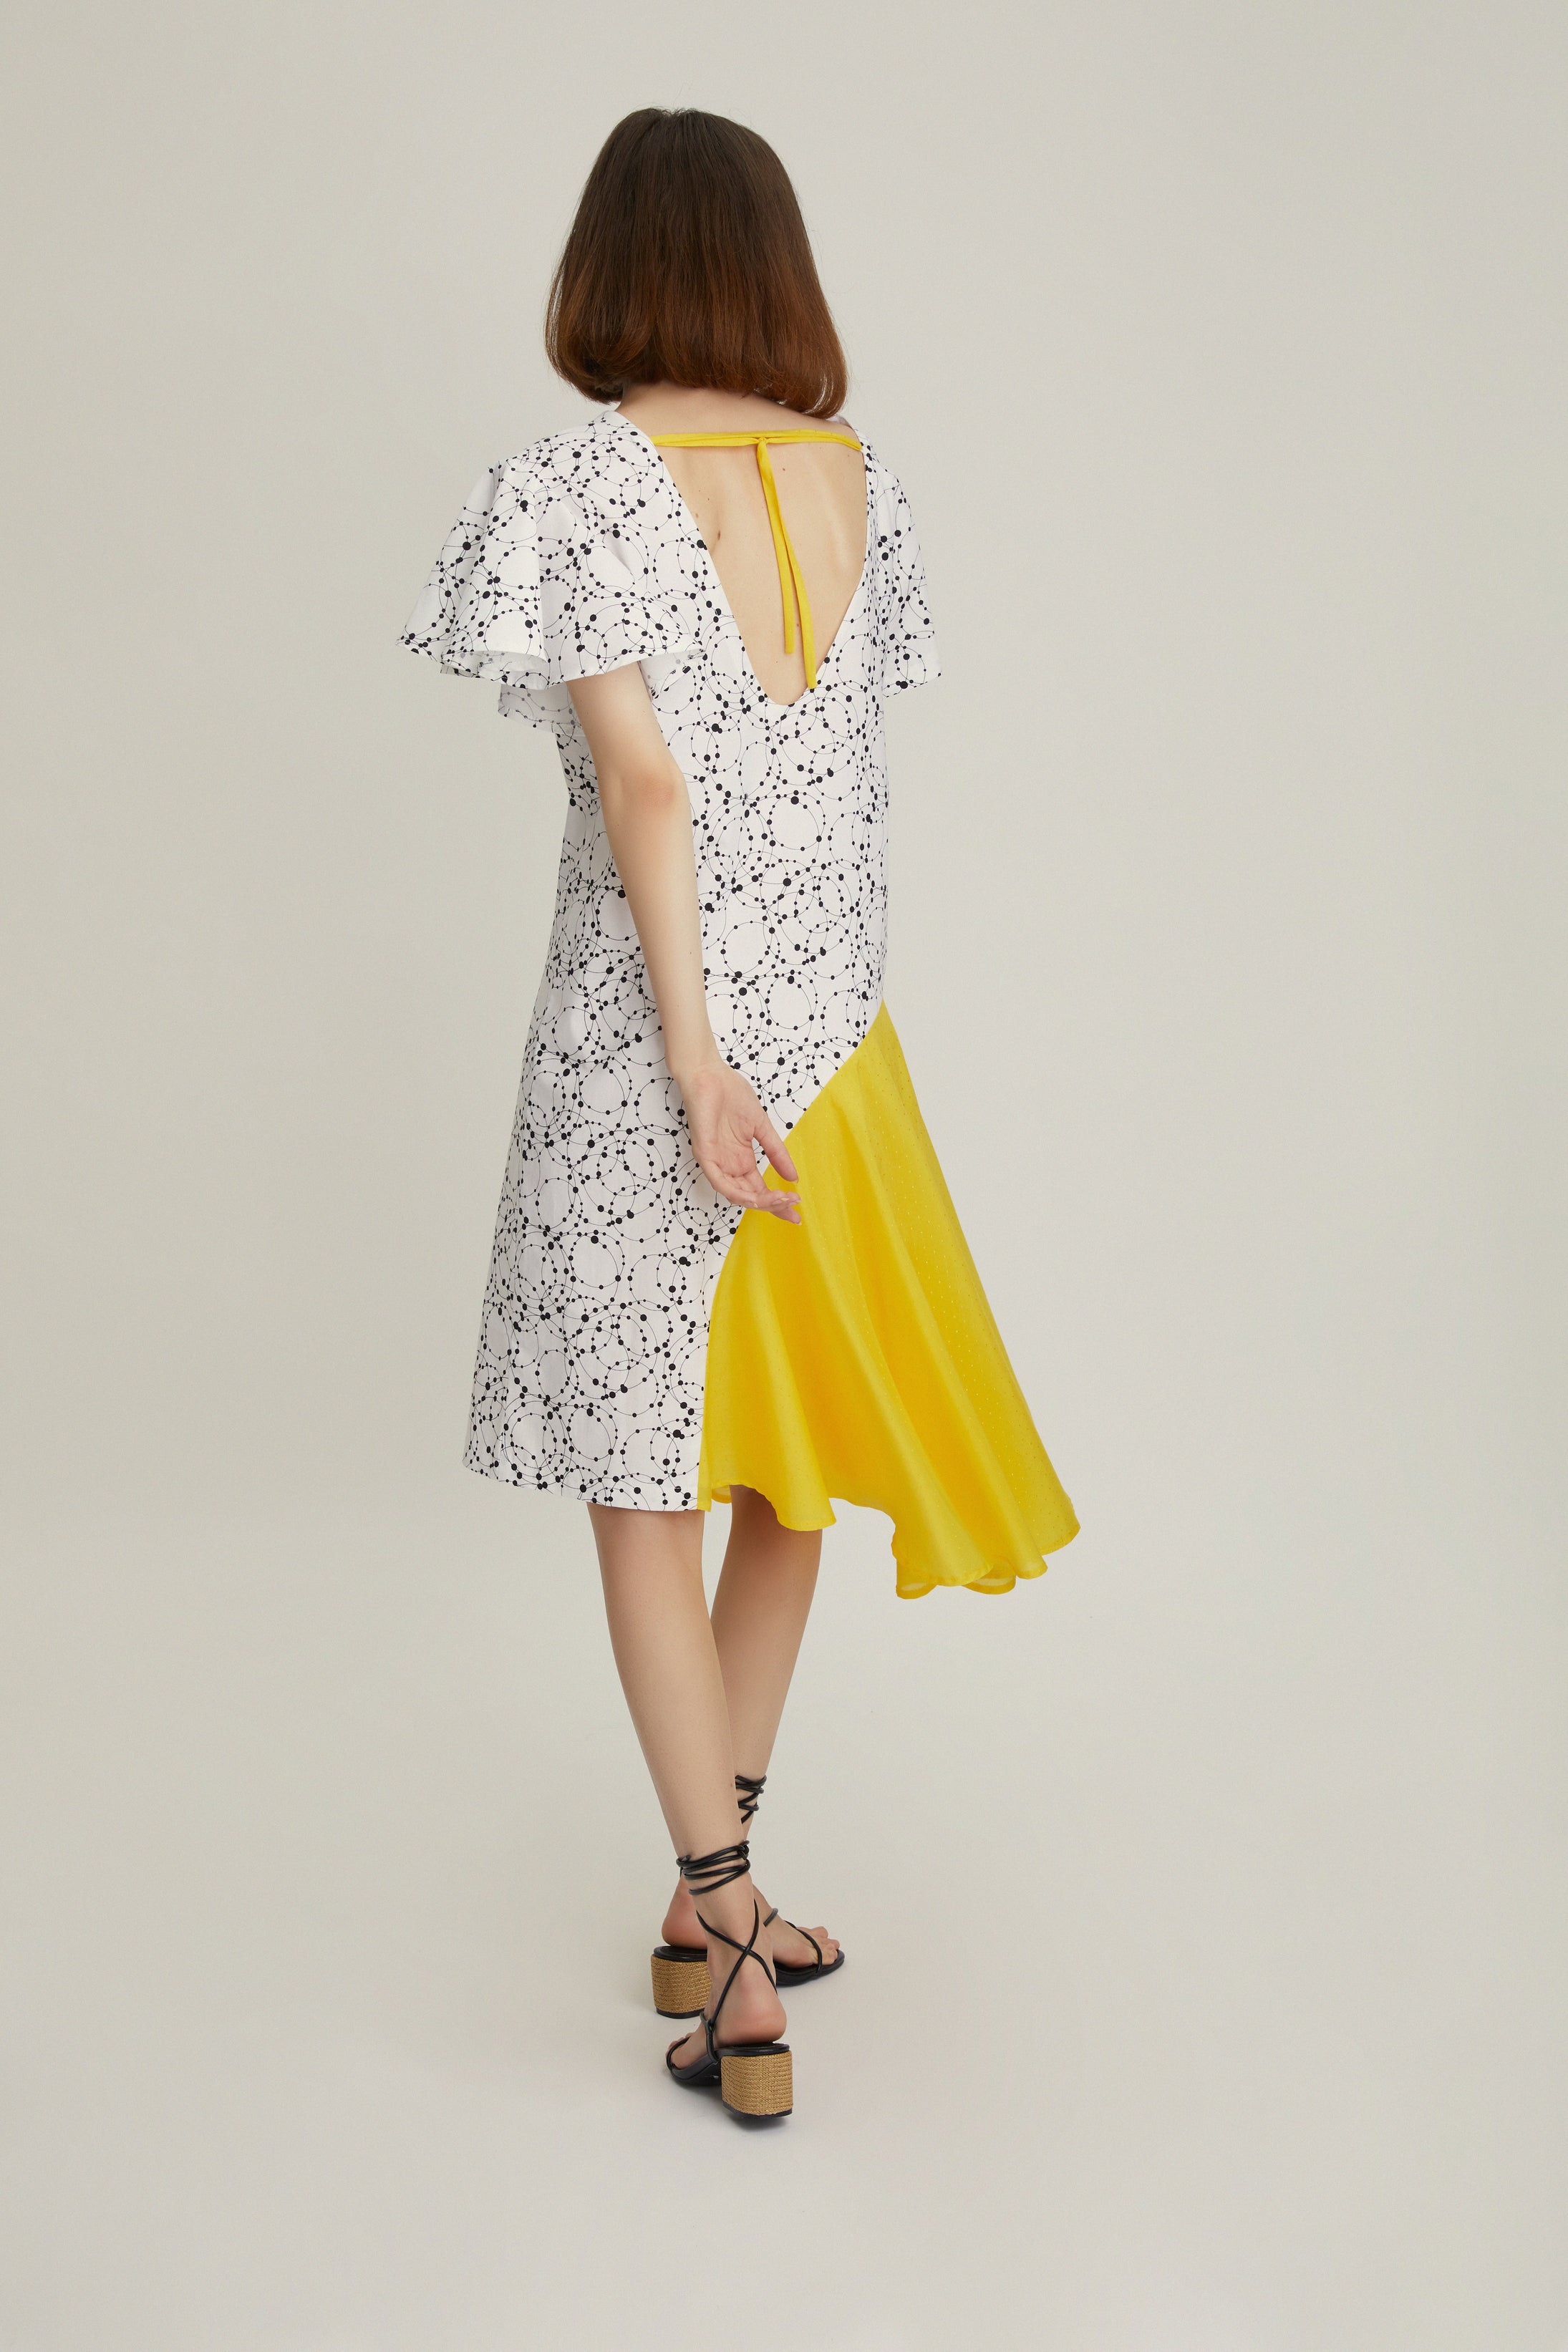 A modern construction, this dress has a back V-neck with a removable yellow dotted silk cord. The sleeves epitomize diversity, you will notice one angled sleeve and one draped. Made from pure cotton with a thick, tactile quality, it has a straight fit and falls just above the knee.